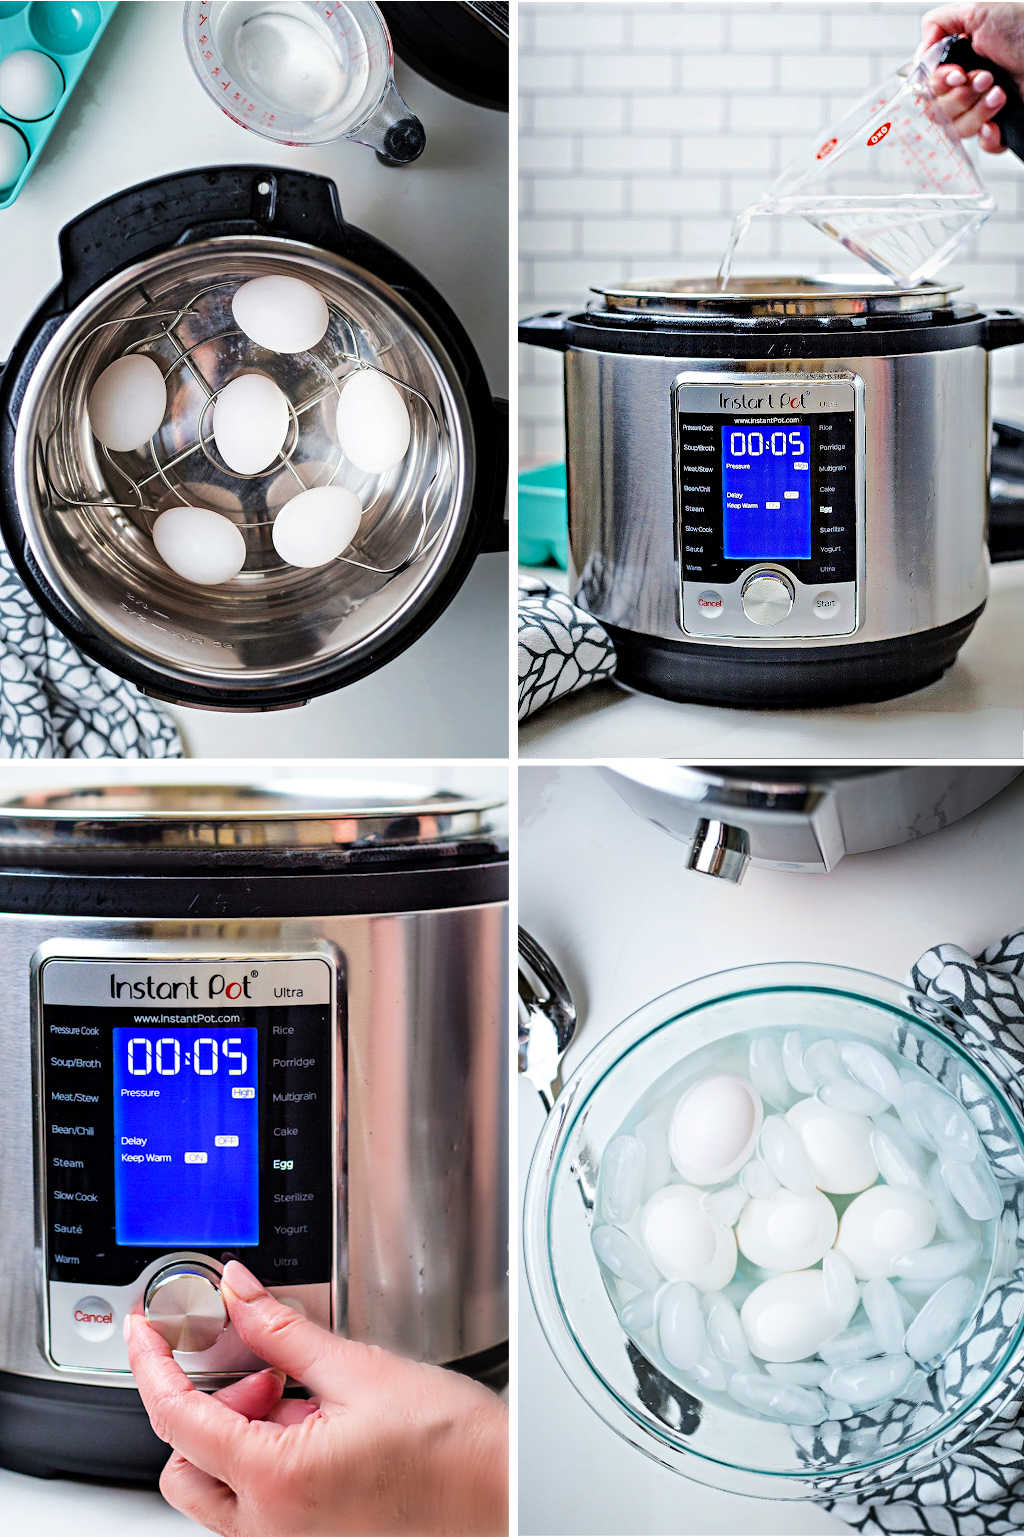 process steps for boiling eggs in the instant pot for Southern Deviled Eggs.